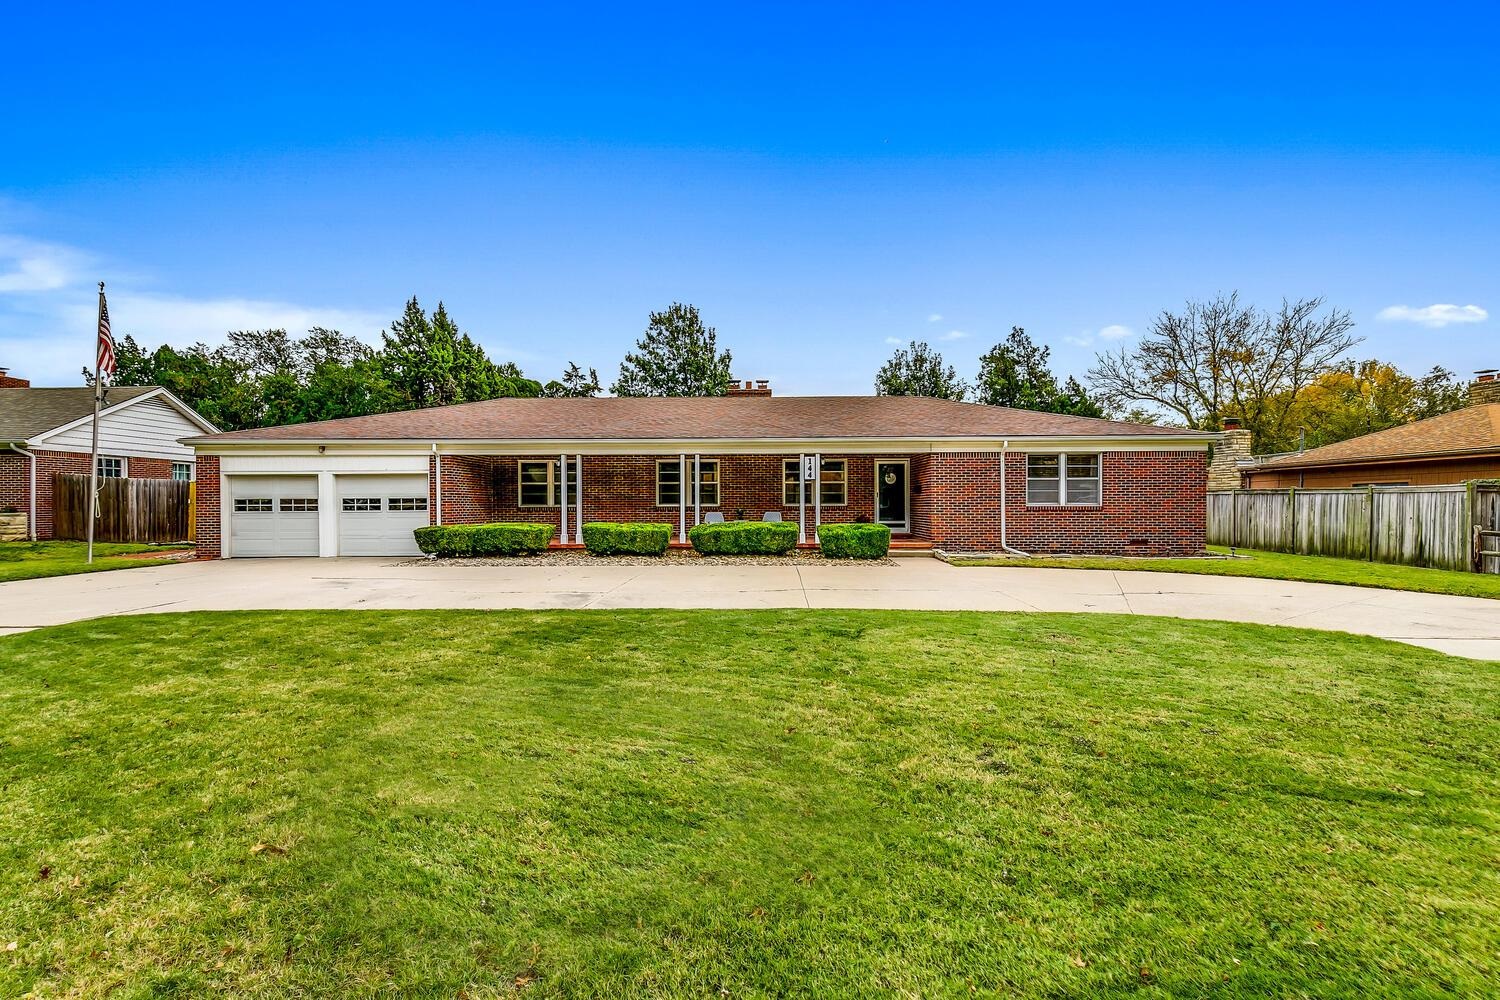 This is "IT", The "ONE".... Welcome Home!! This all brick ranch is located in one of East Wichita's 